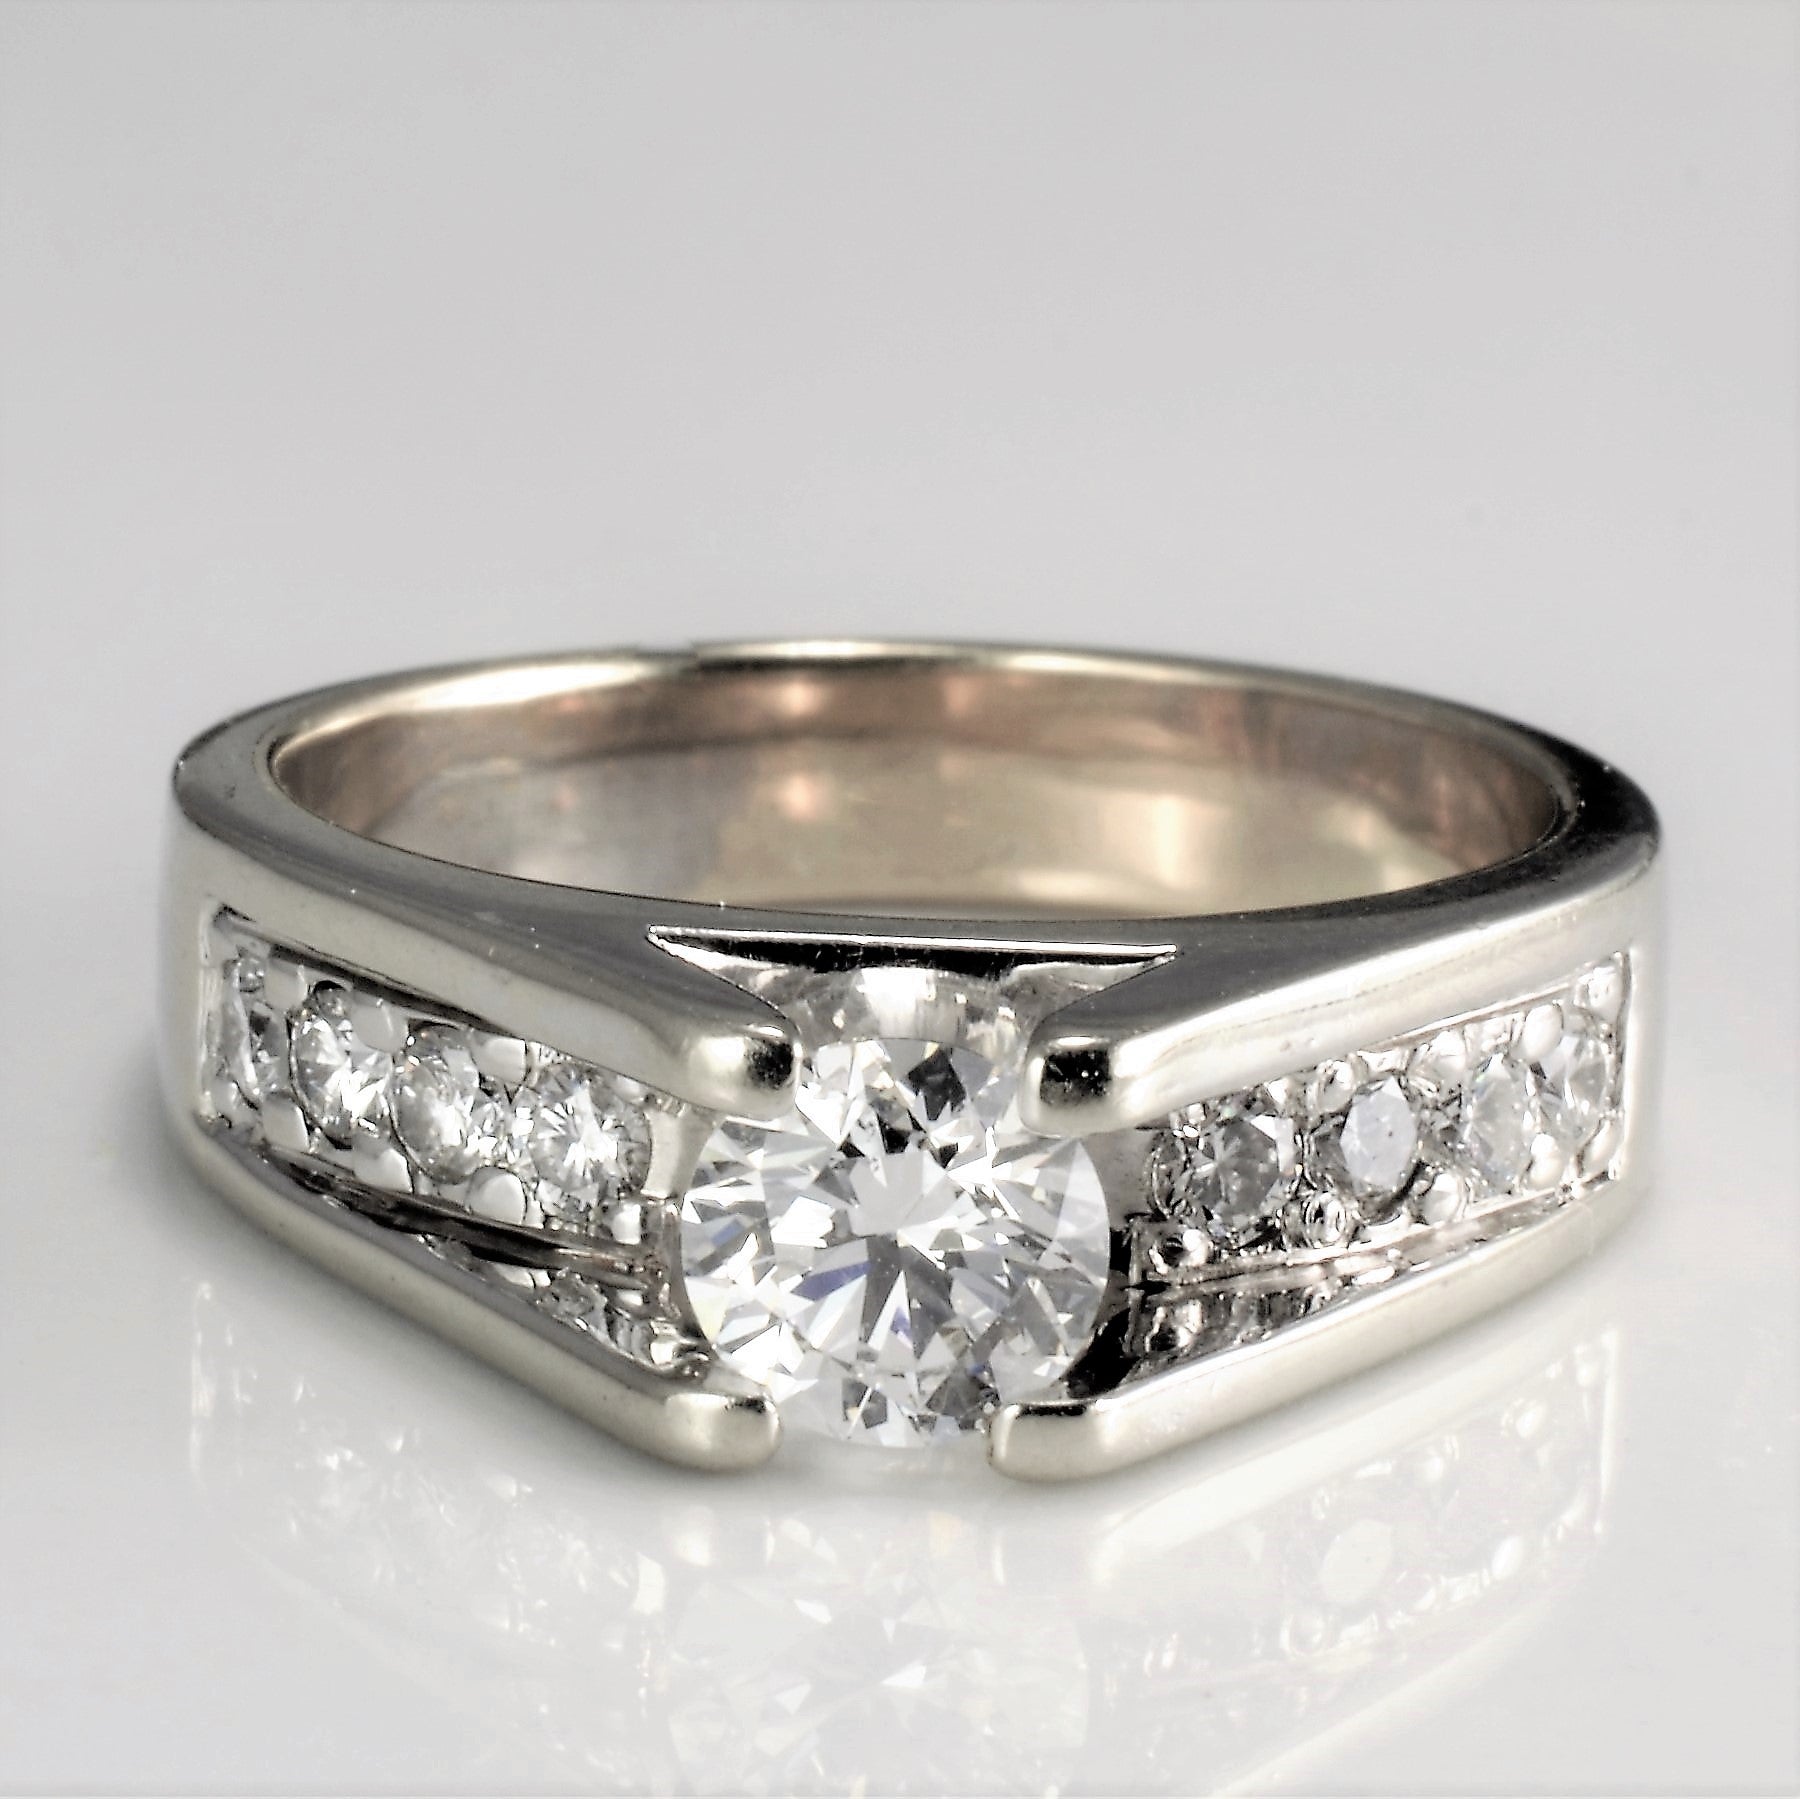 High Set Diamond with Accents Engagement Ring | 0.87 ctw, SZ 7.5 |